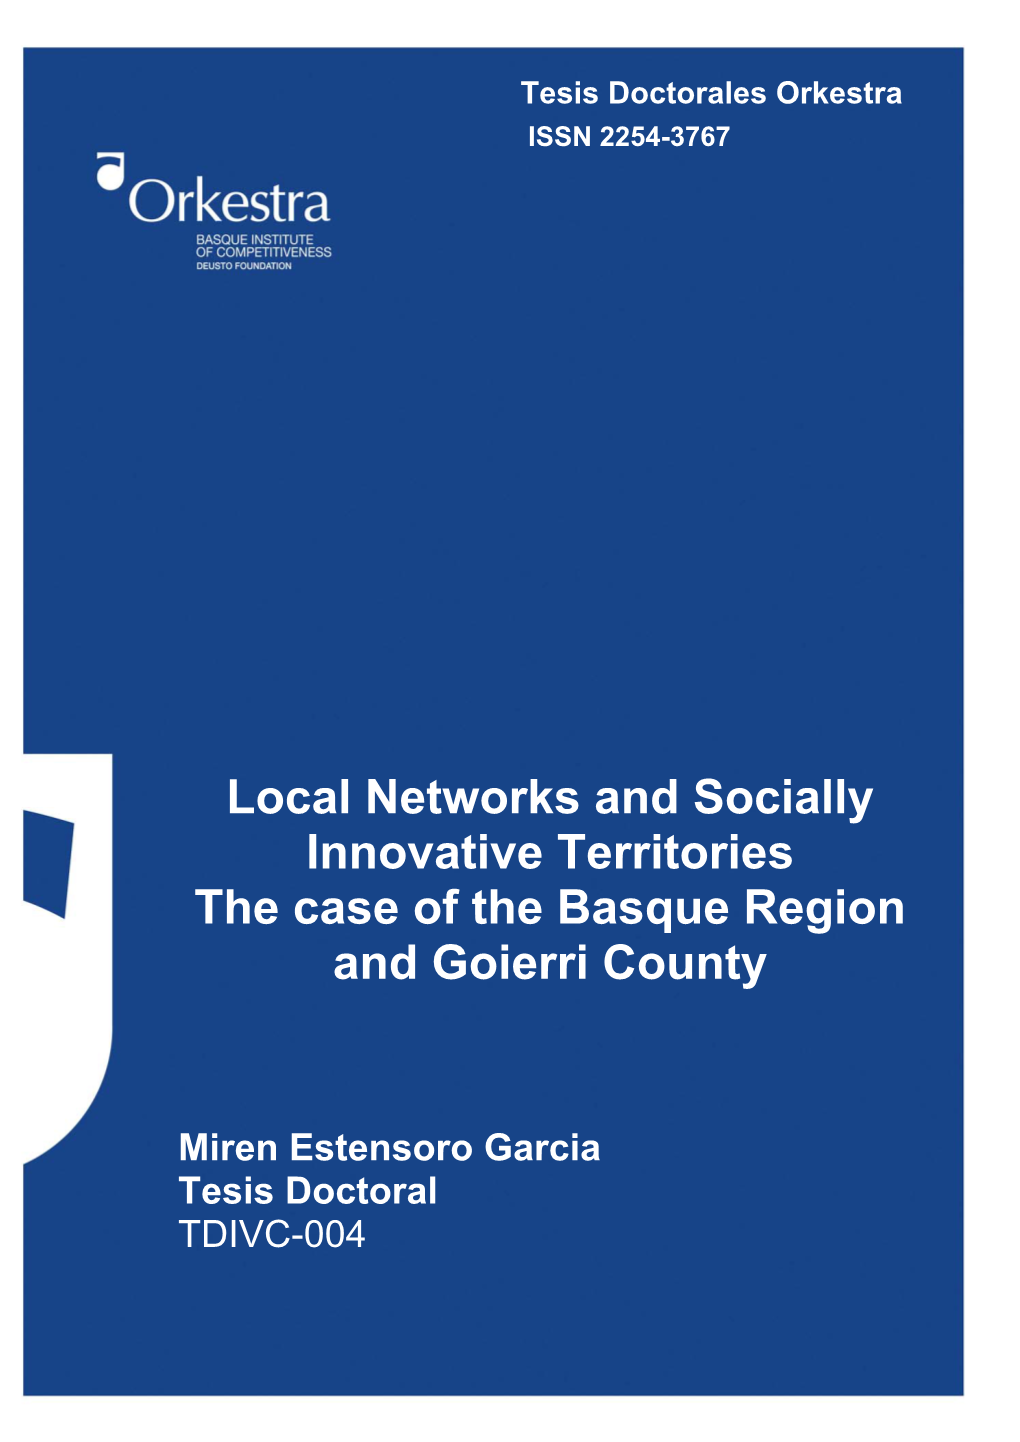 Local Networks and Socially Innovative Territories the Case of the Basque Region and Goierri County